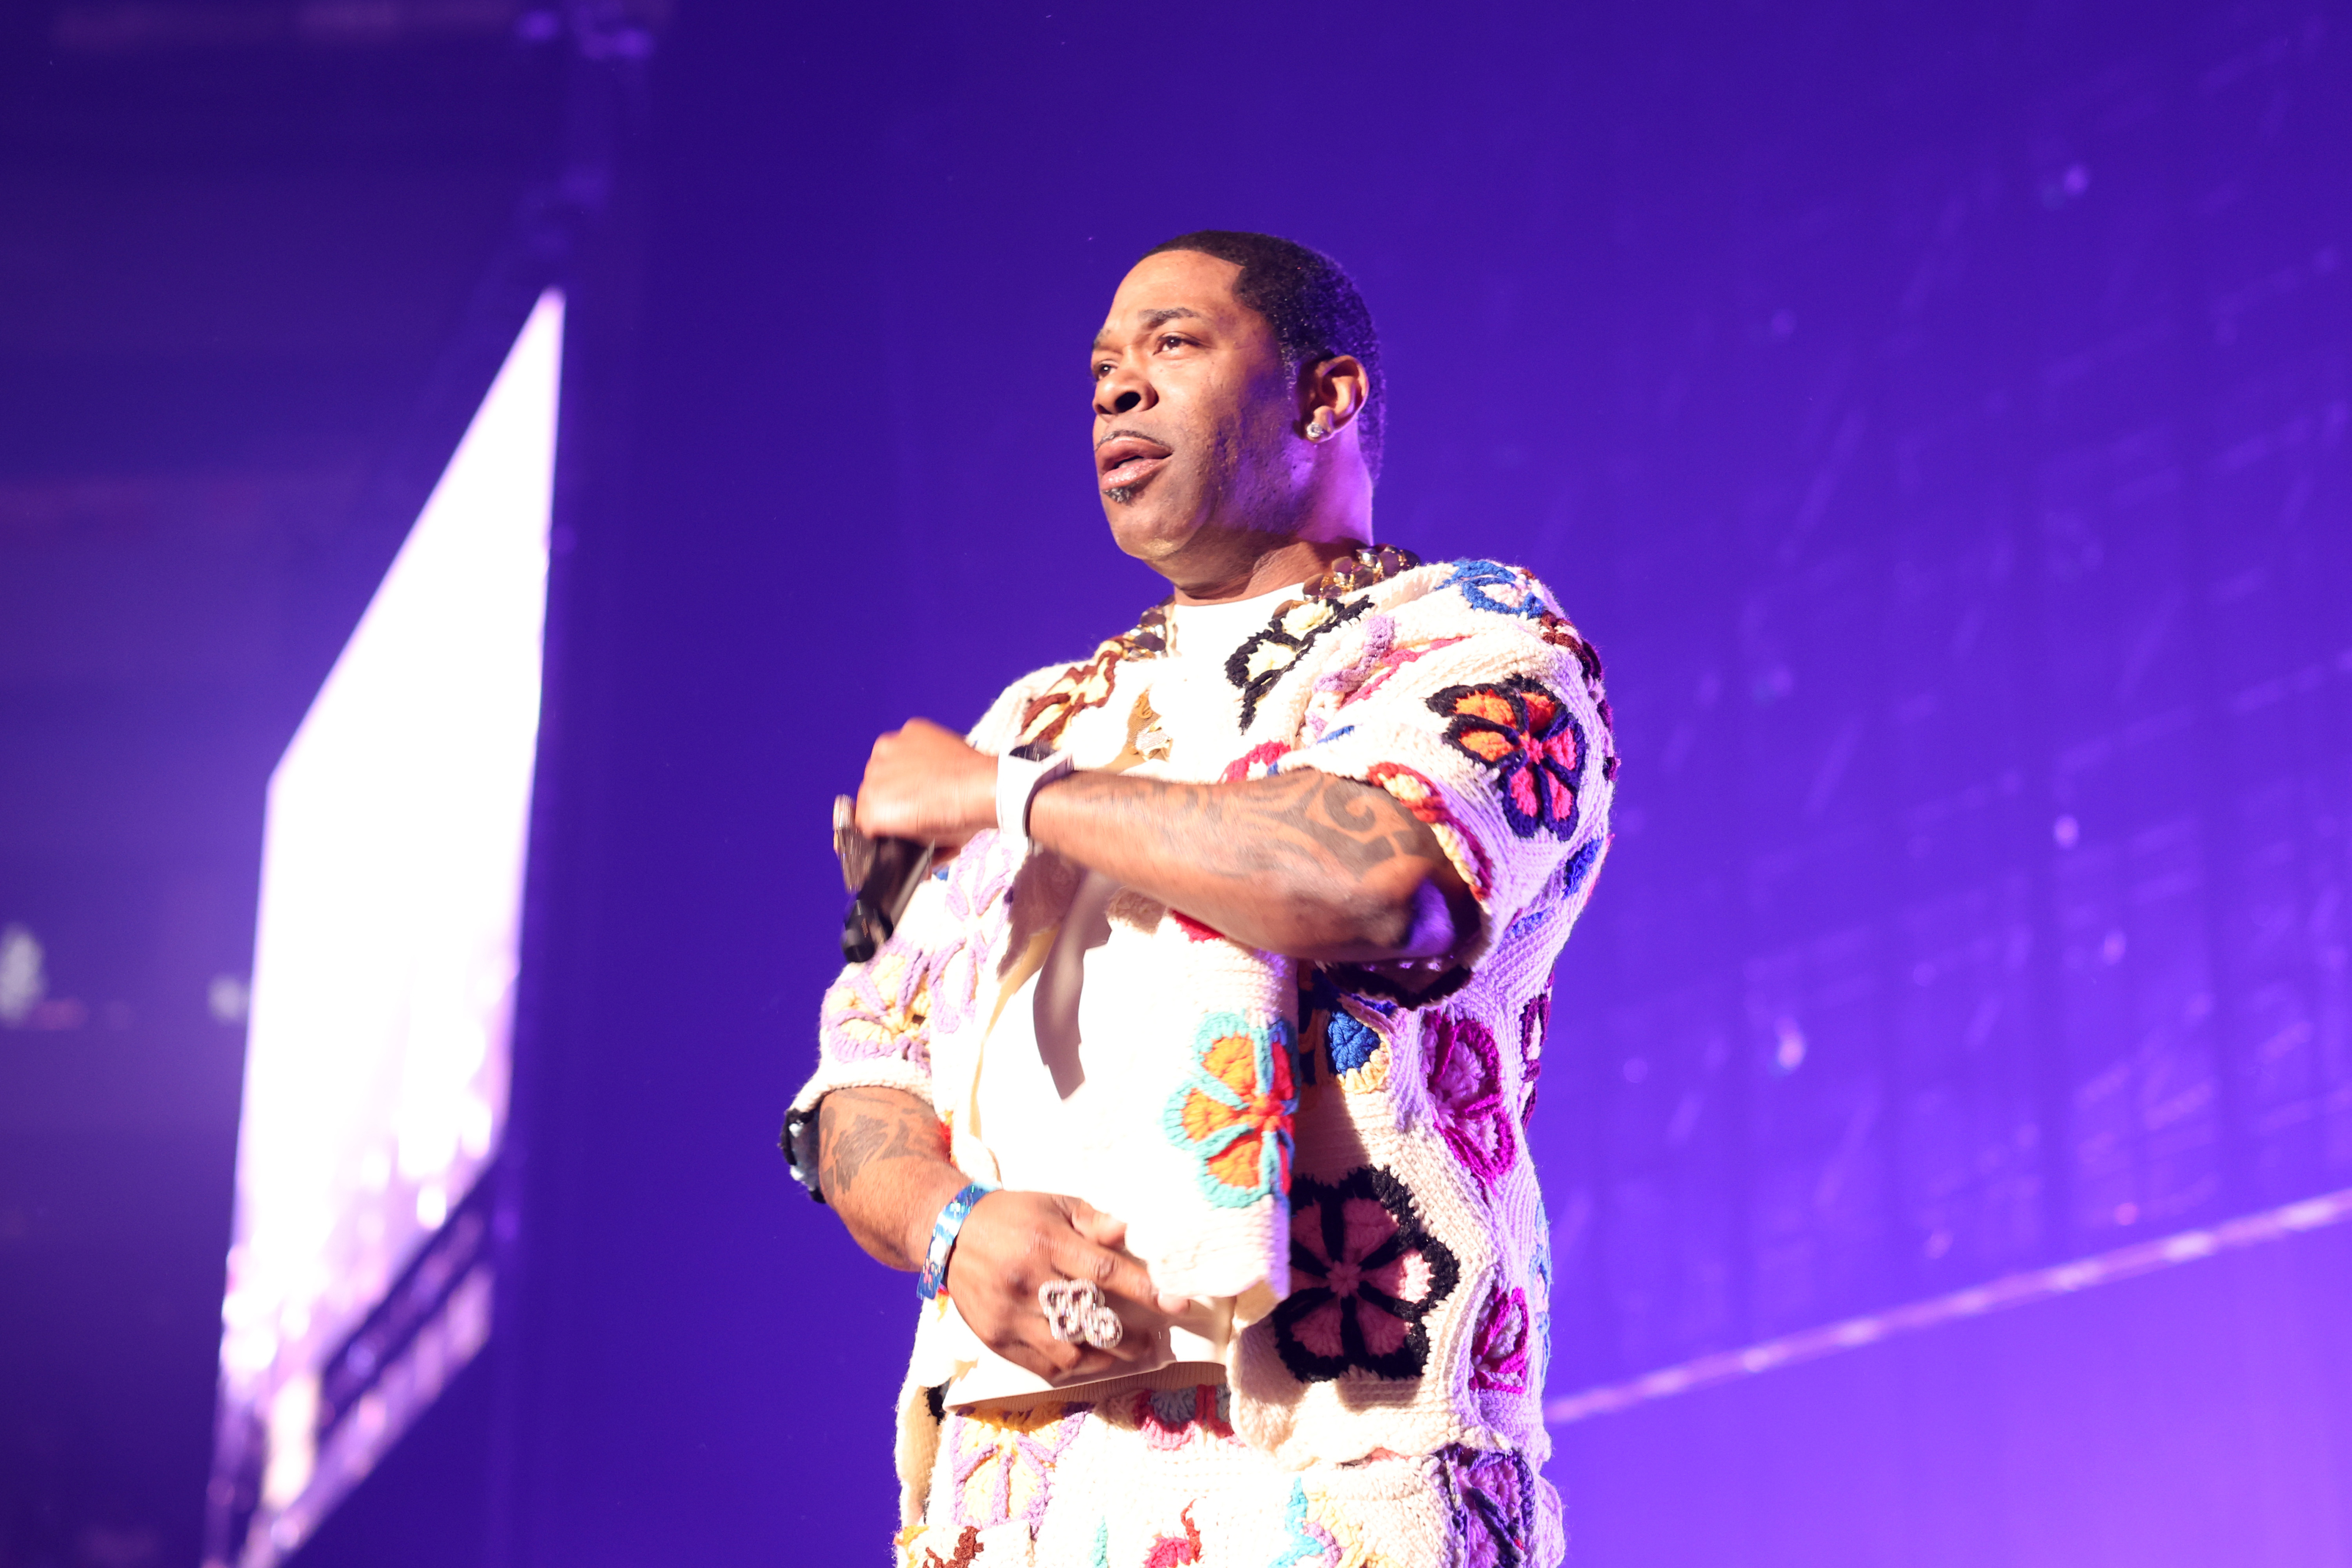 Busta Rhymes performing on stage, wearing a matching short-sleeved top and pants with a floral pattern